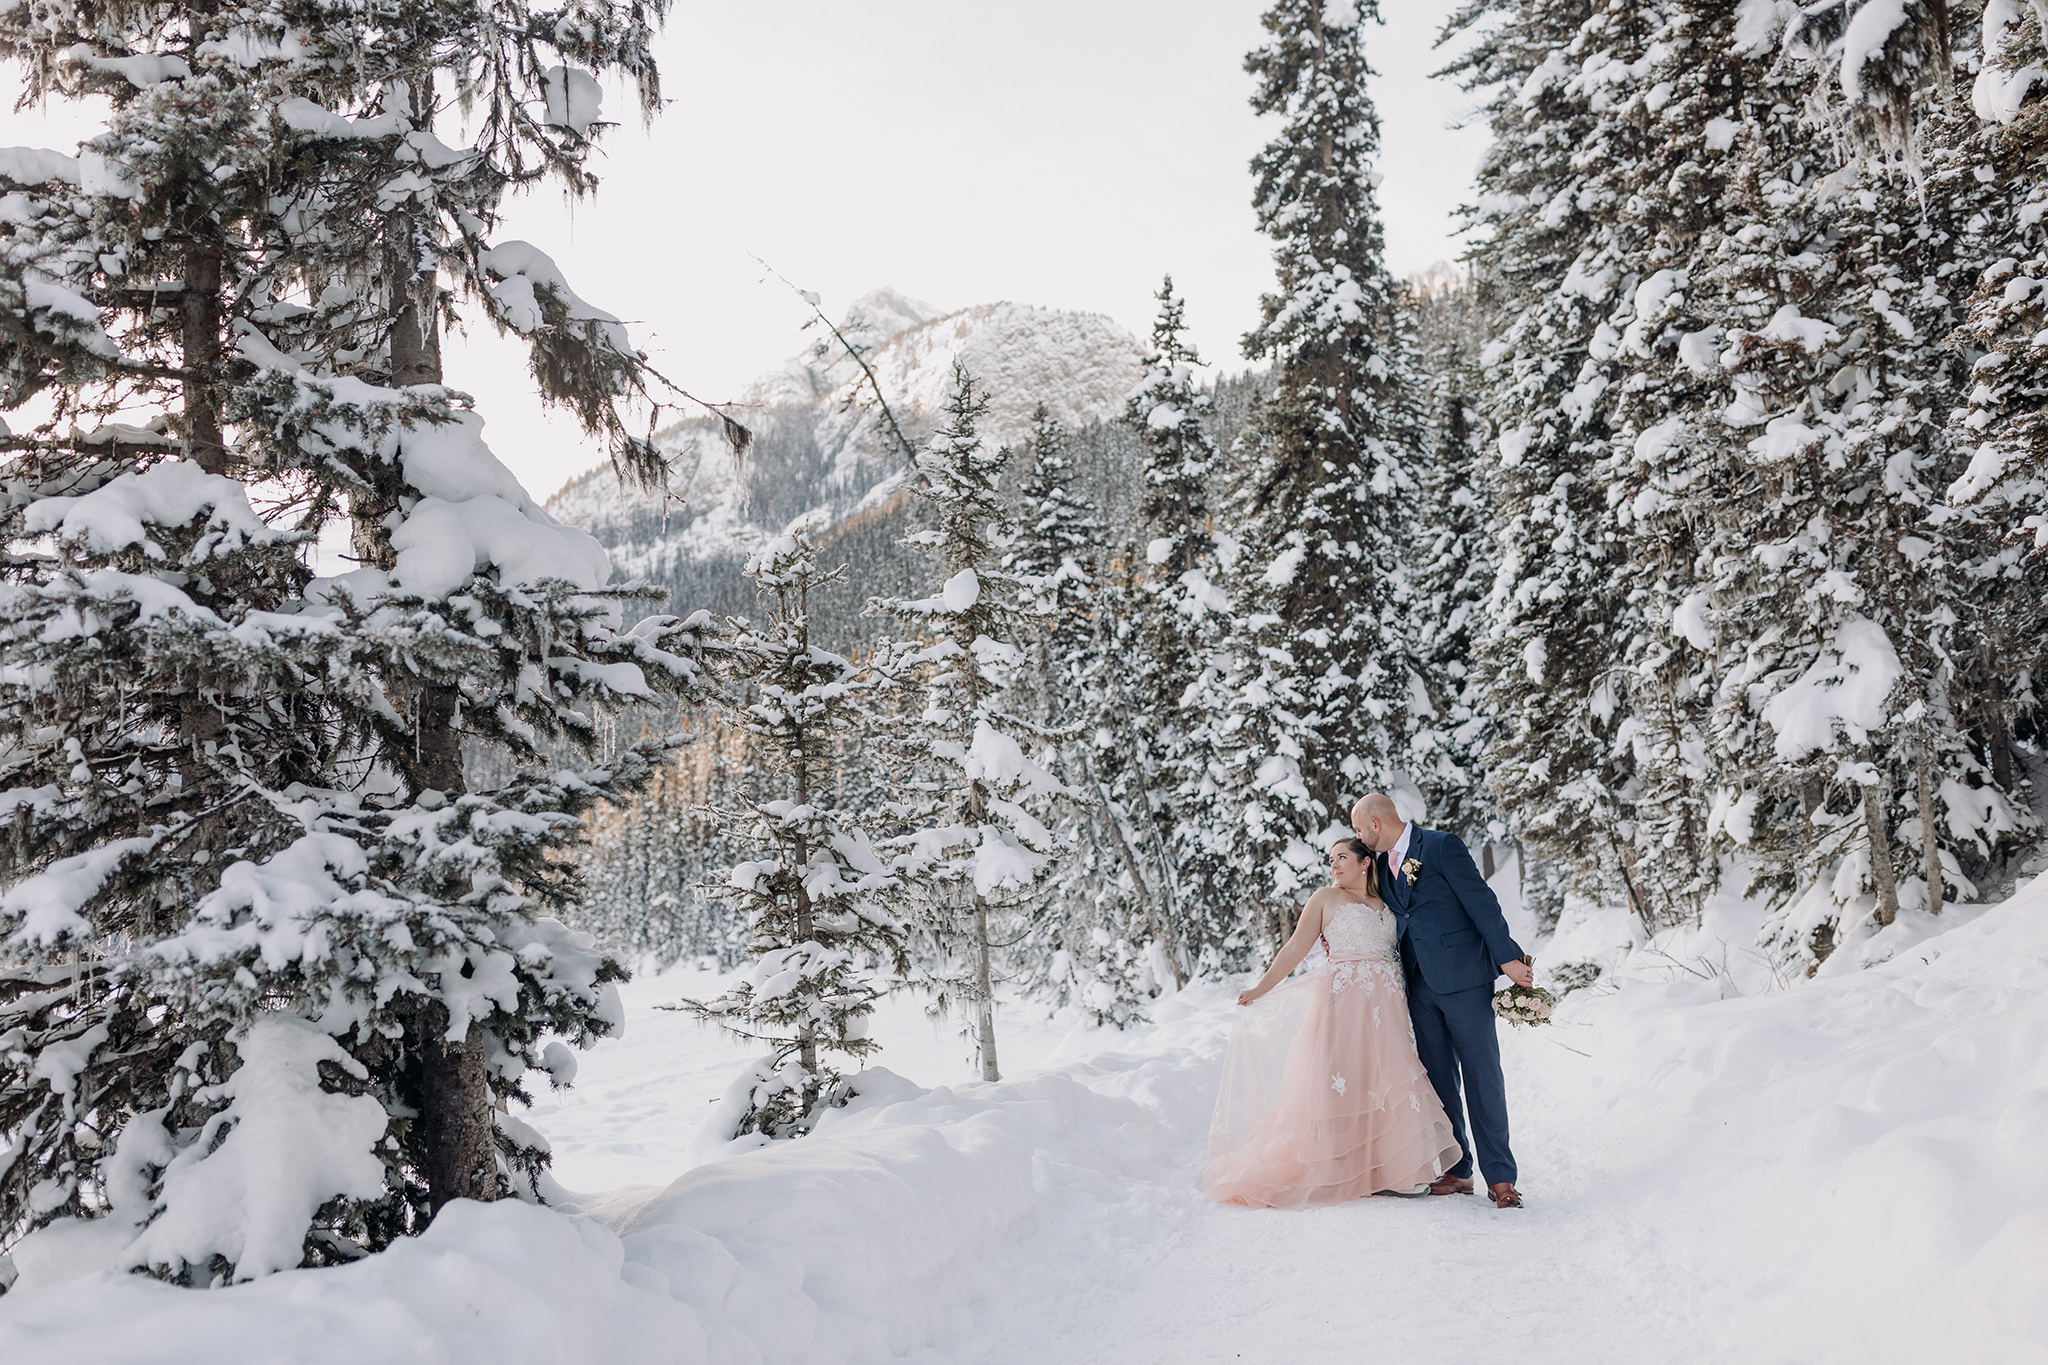 Lake Louise winter elopement on frozen Lake Louise with Bride in pink wedding dress in winter wonderland Super snowy elopement wedding photographed by ENV Photography